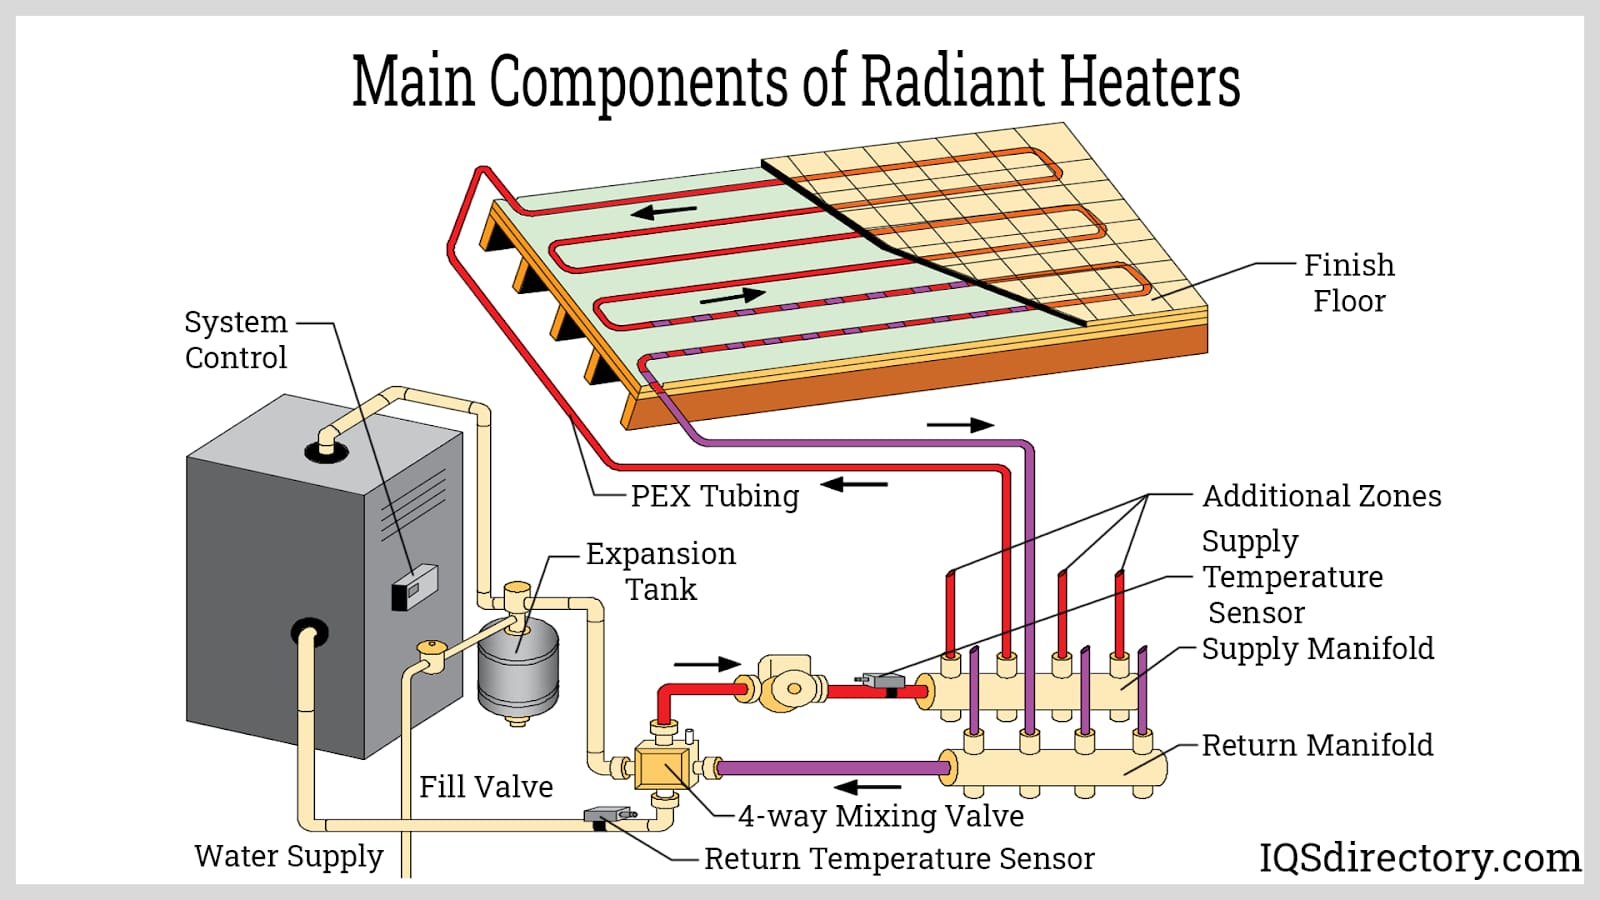 Main Components of Radiant Heaters